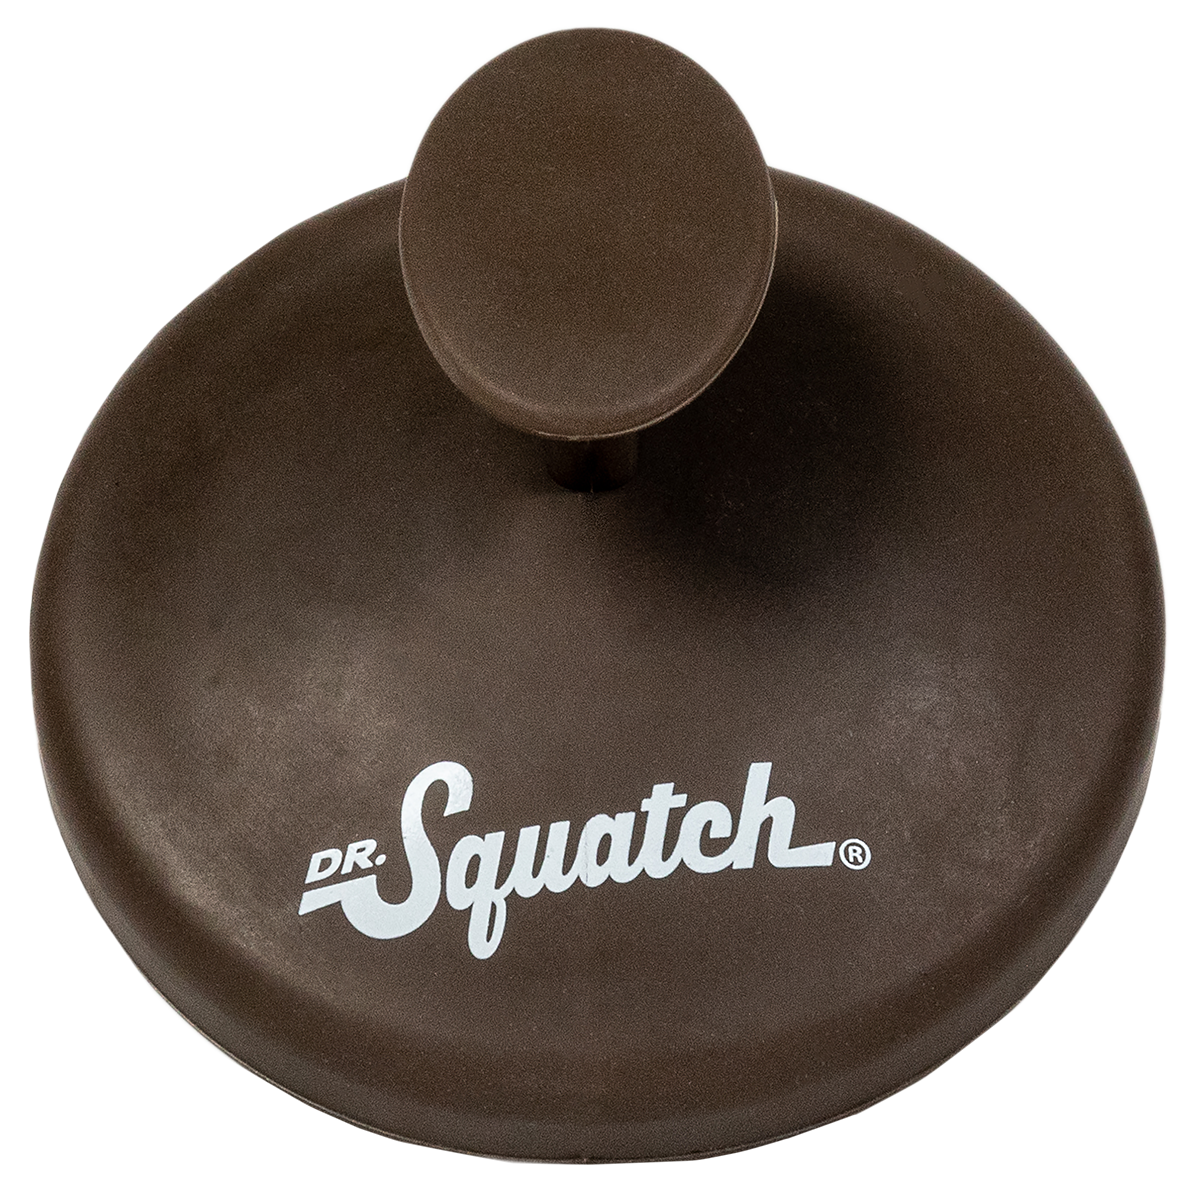 Dr. Squatch Scalp Scrubber - Is it just a gimmick??? 